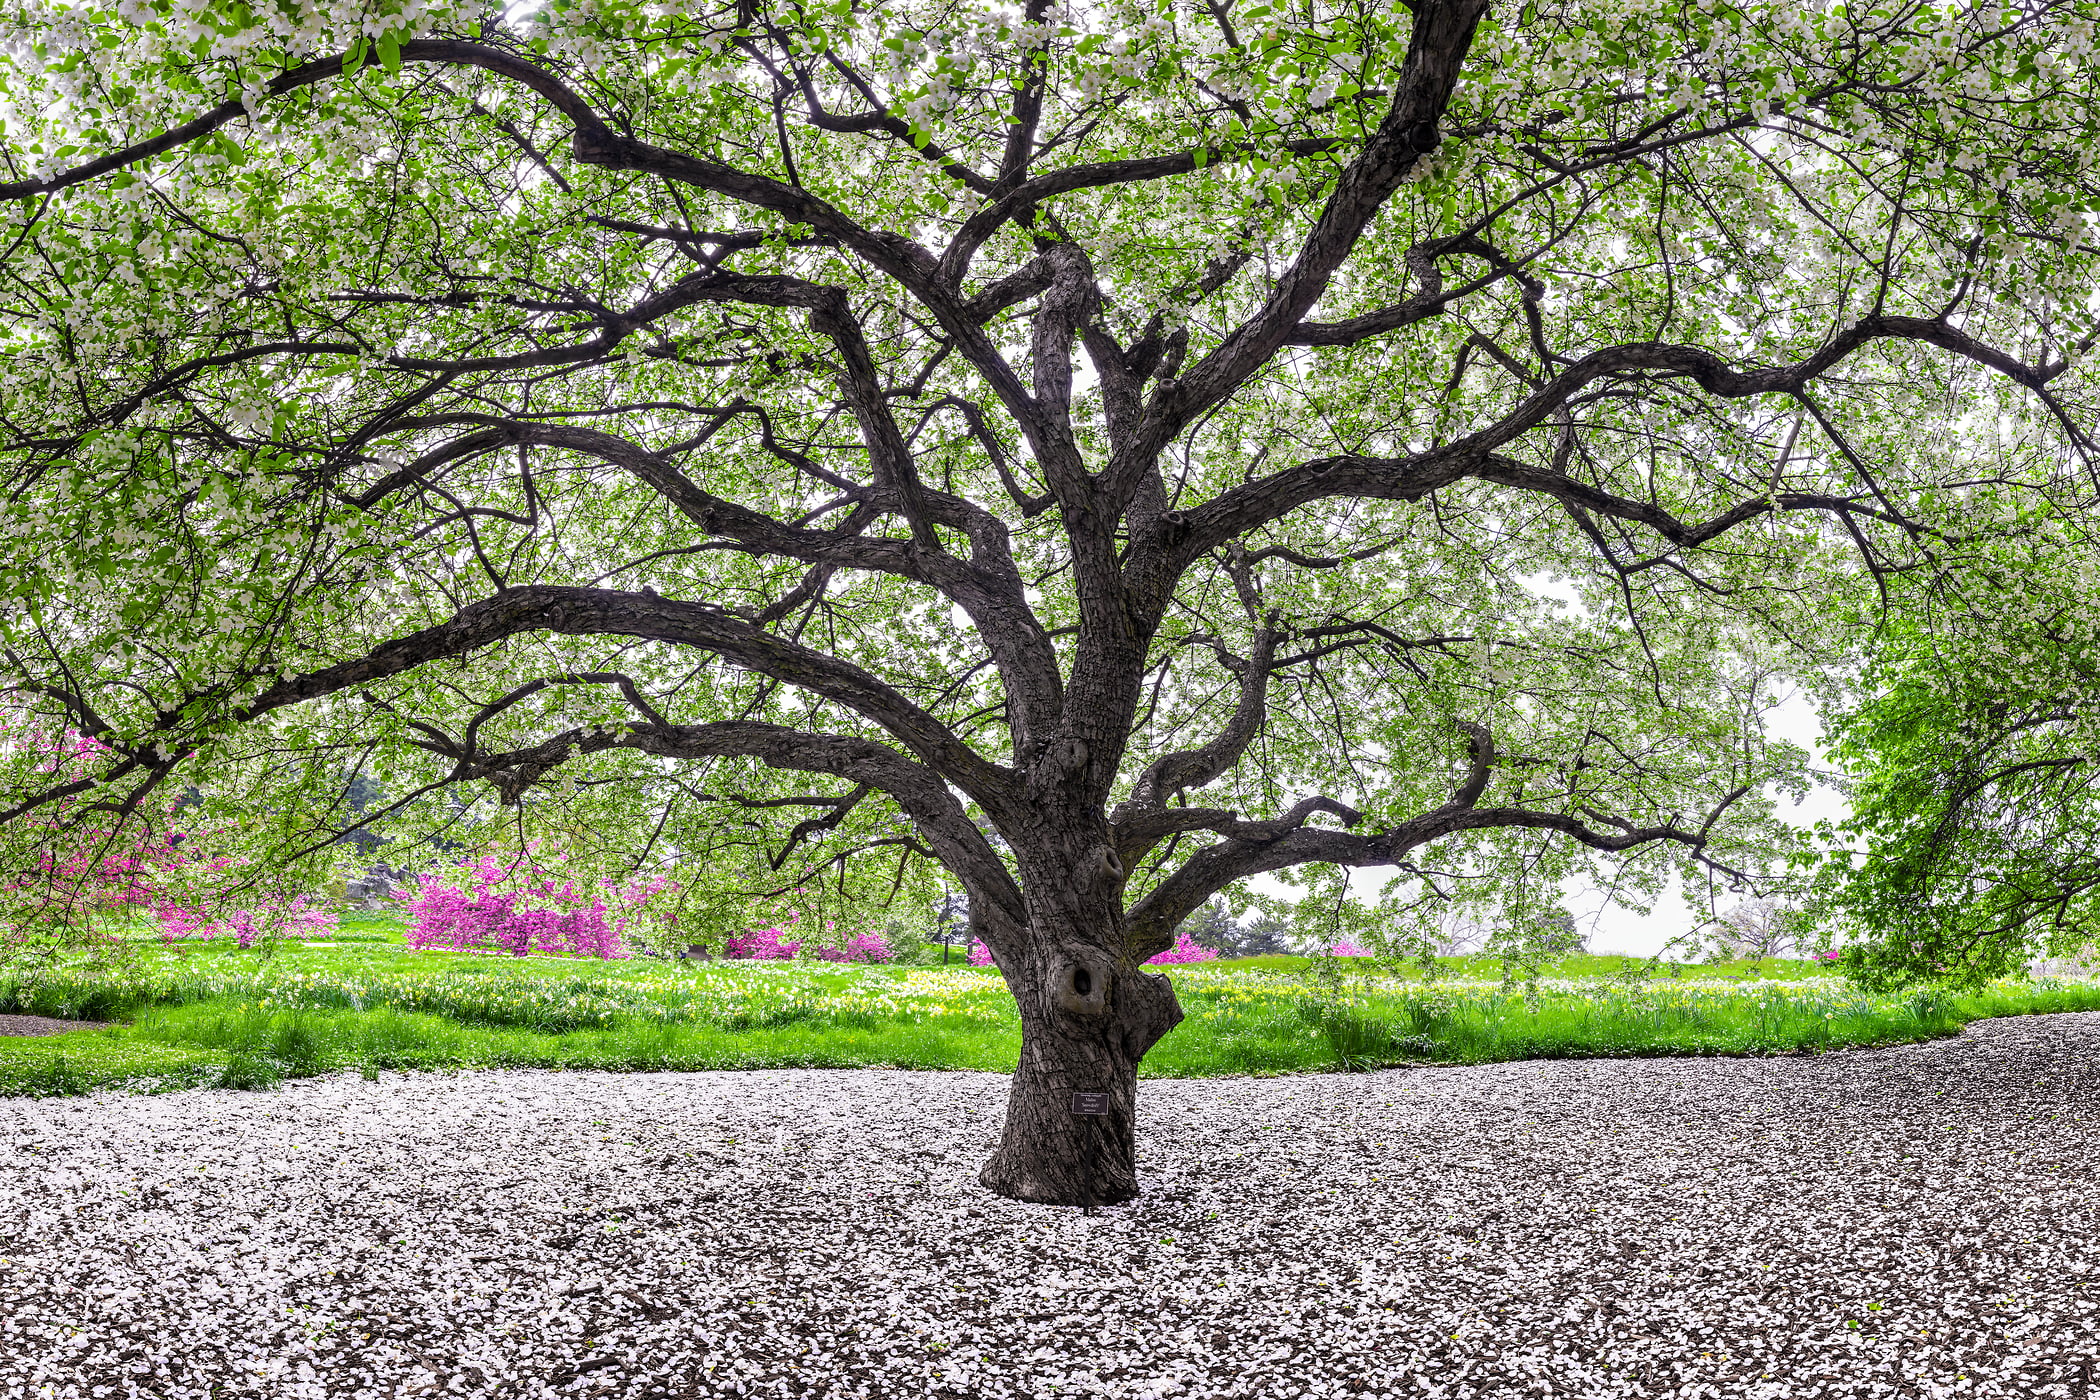 874 megapixels! A very high resolution, large-format VAST photo of a crabapple tree blooming in spring with blossom petals on the ground; fine art photograph created by Dan Piech in the New York Botanical Garden, New York City